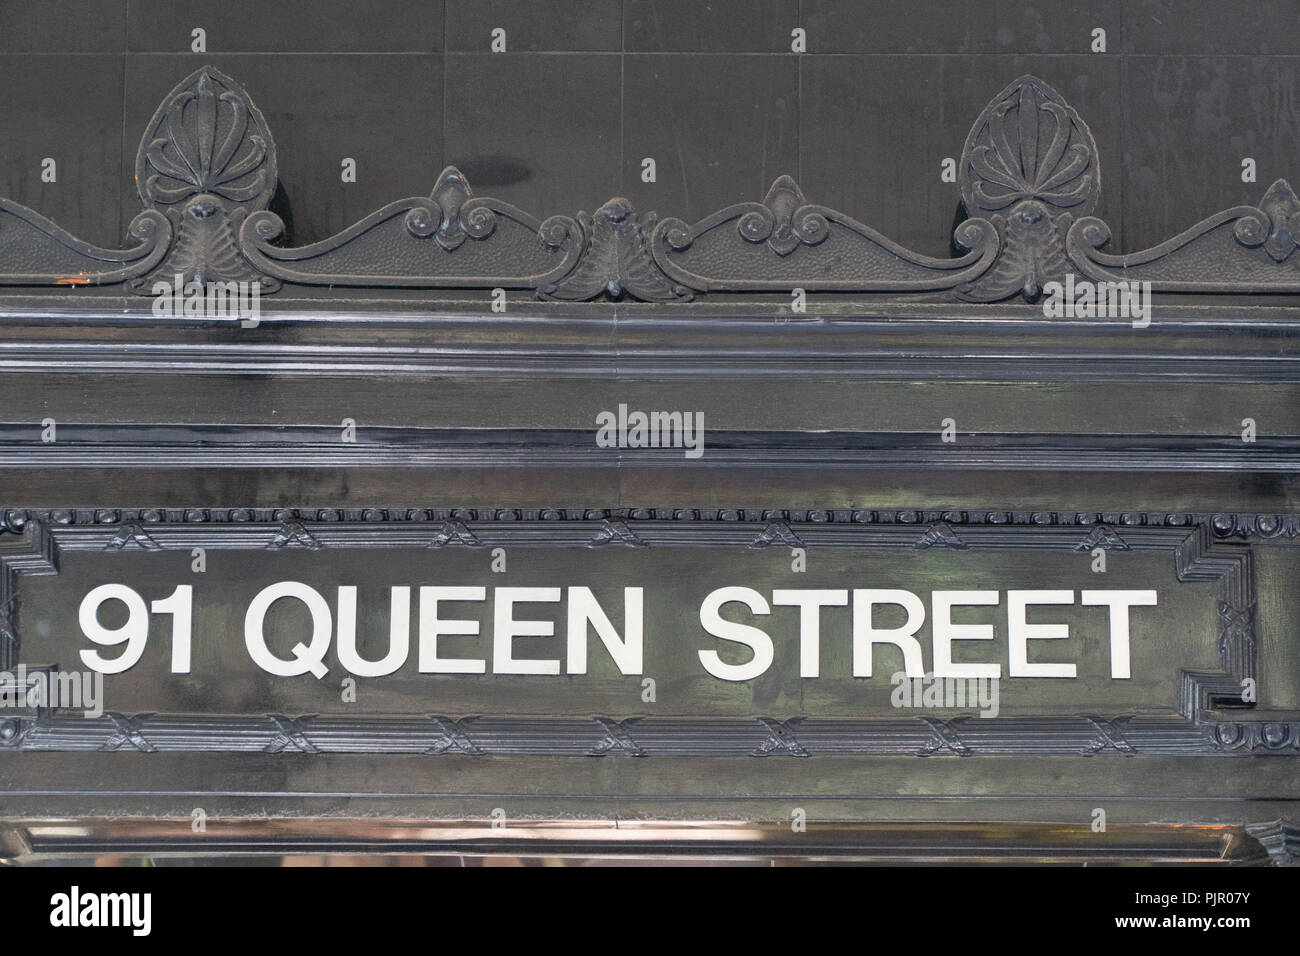 91 Queen Street font in entrance area Stock Photo